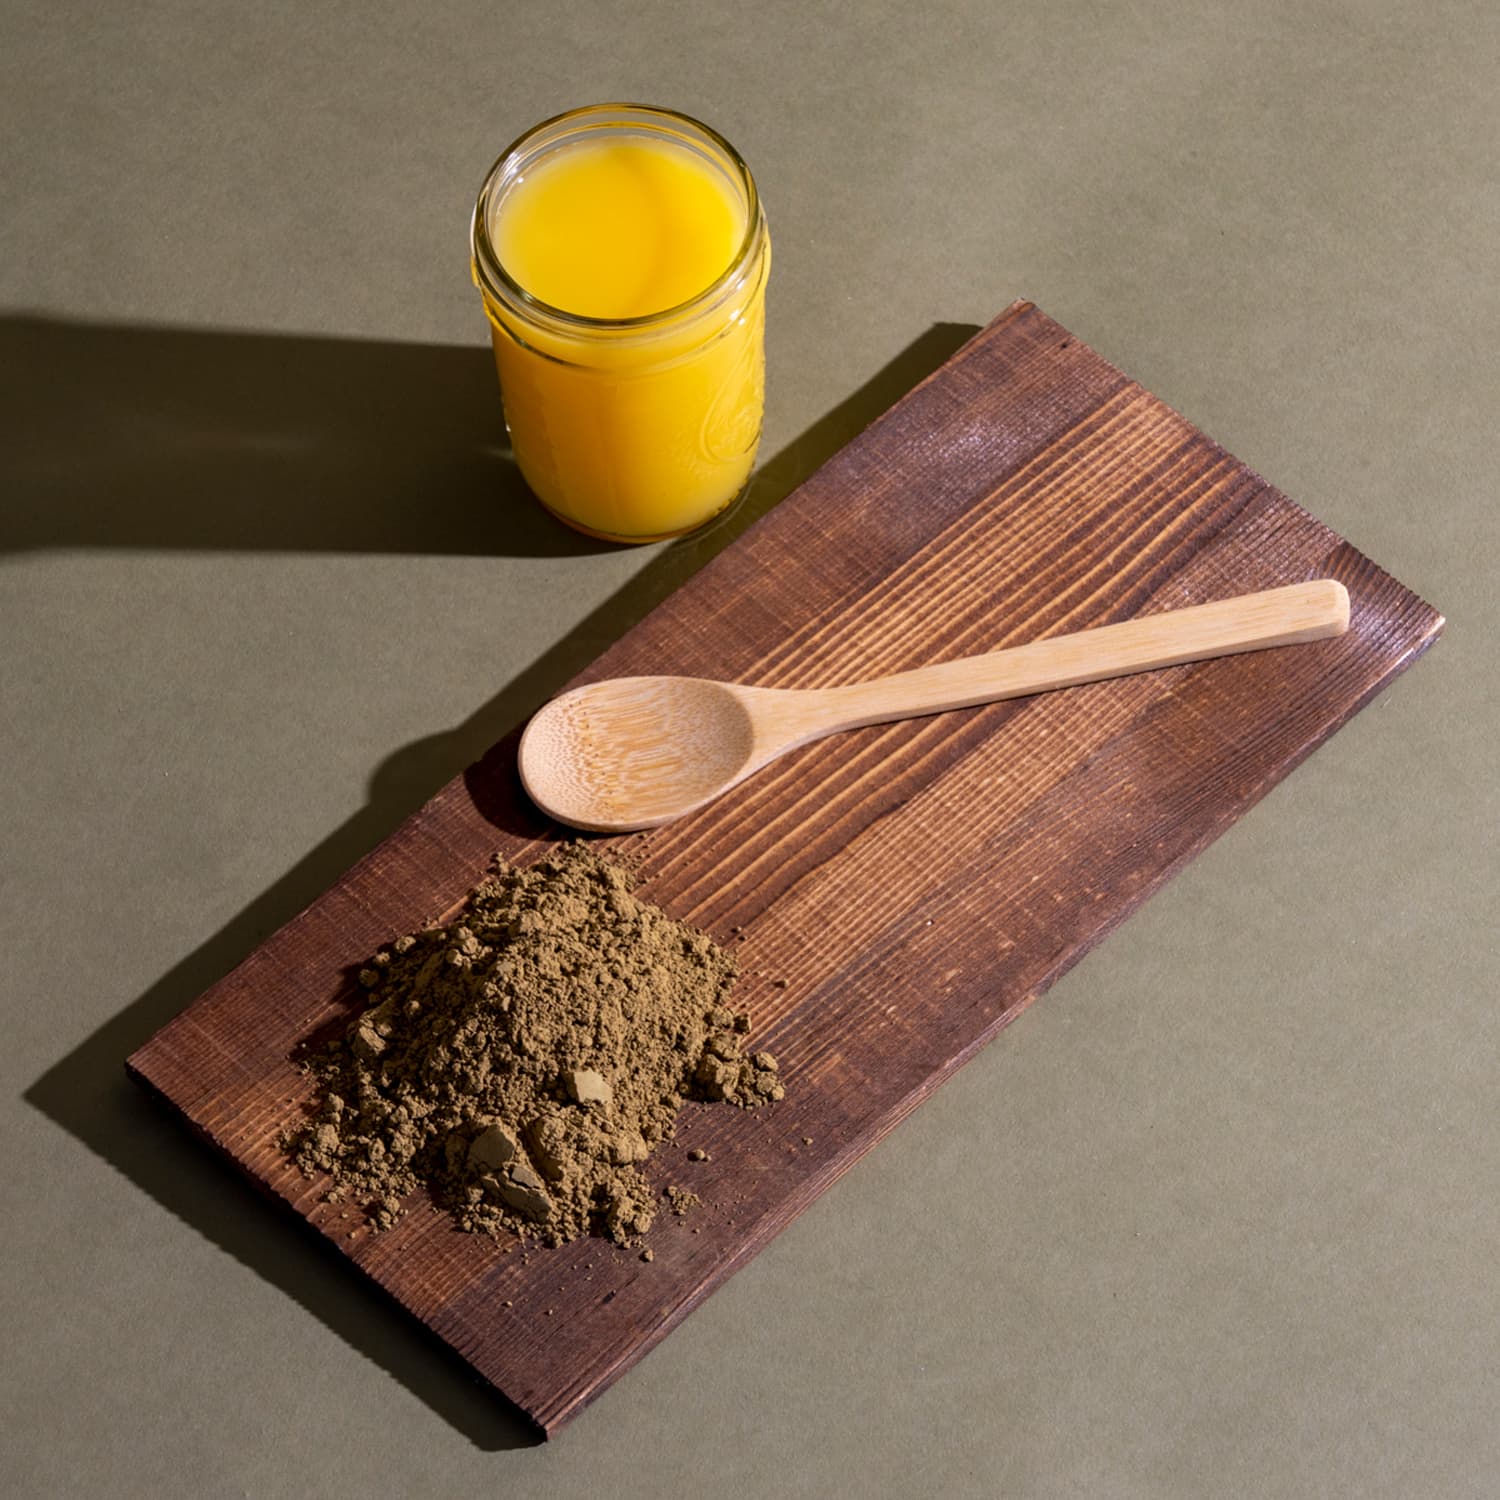 A spoon and kratom powder on a wooden board next to a glass of orange juice